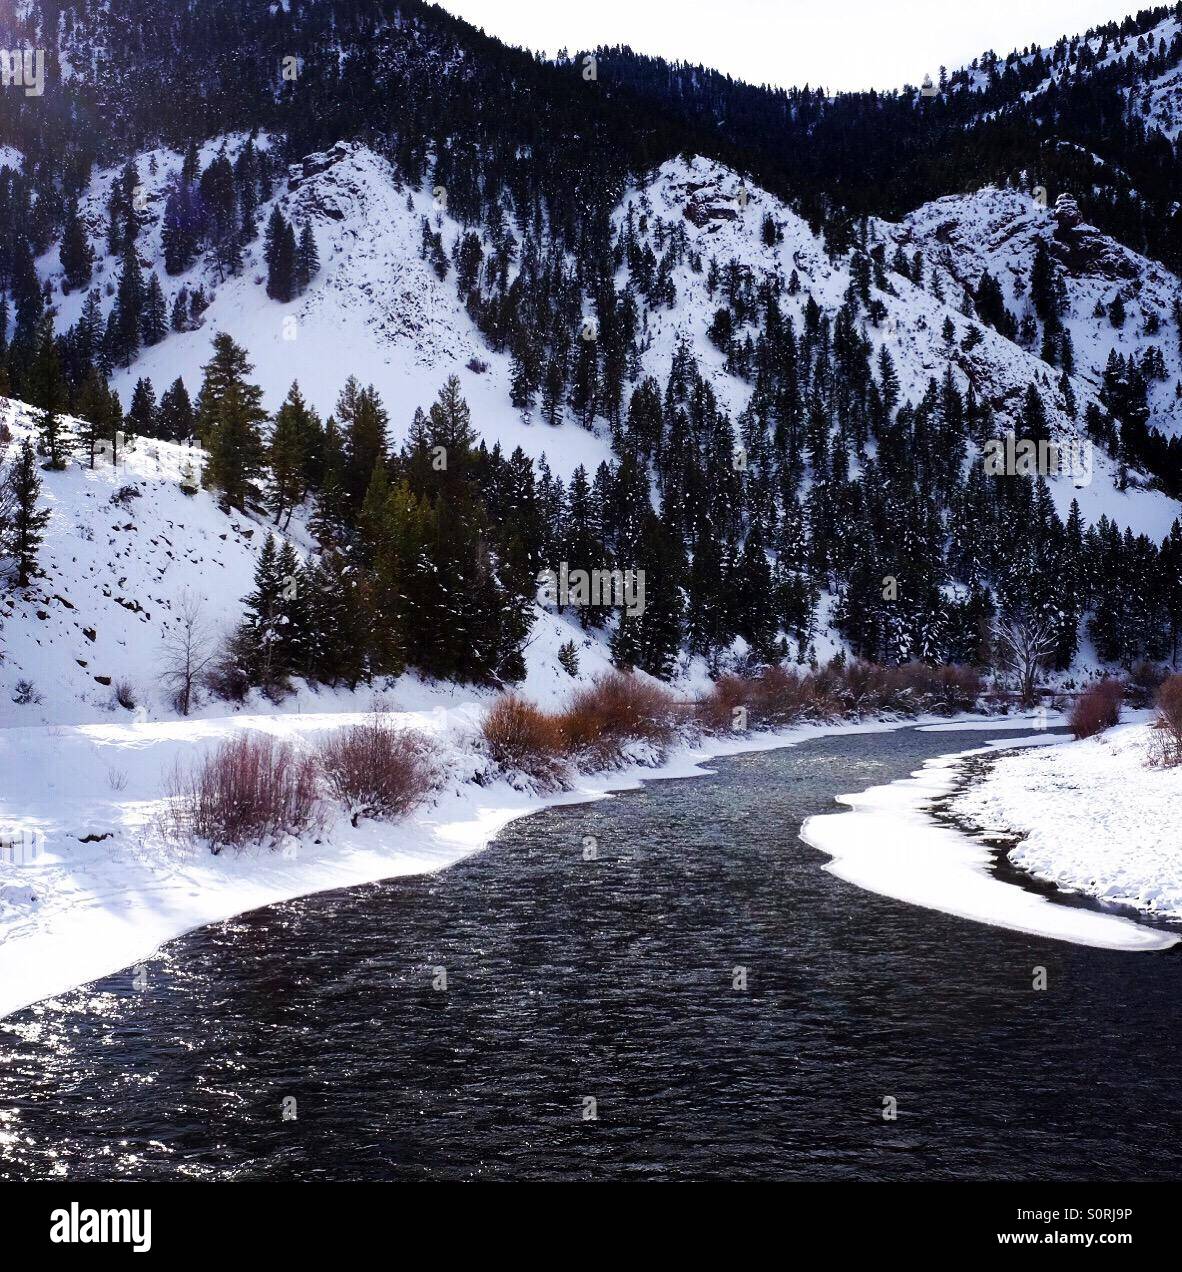 The Salmon River in Idaho with winter snow Stock Photo